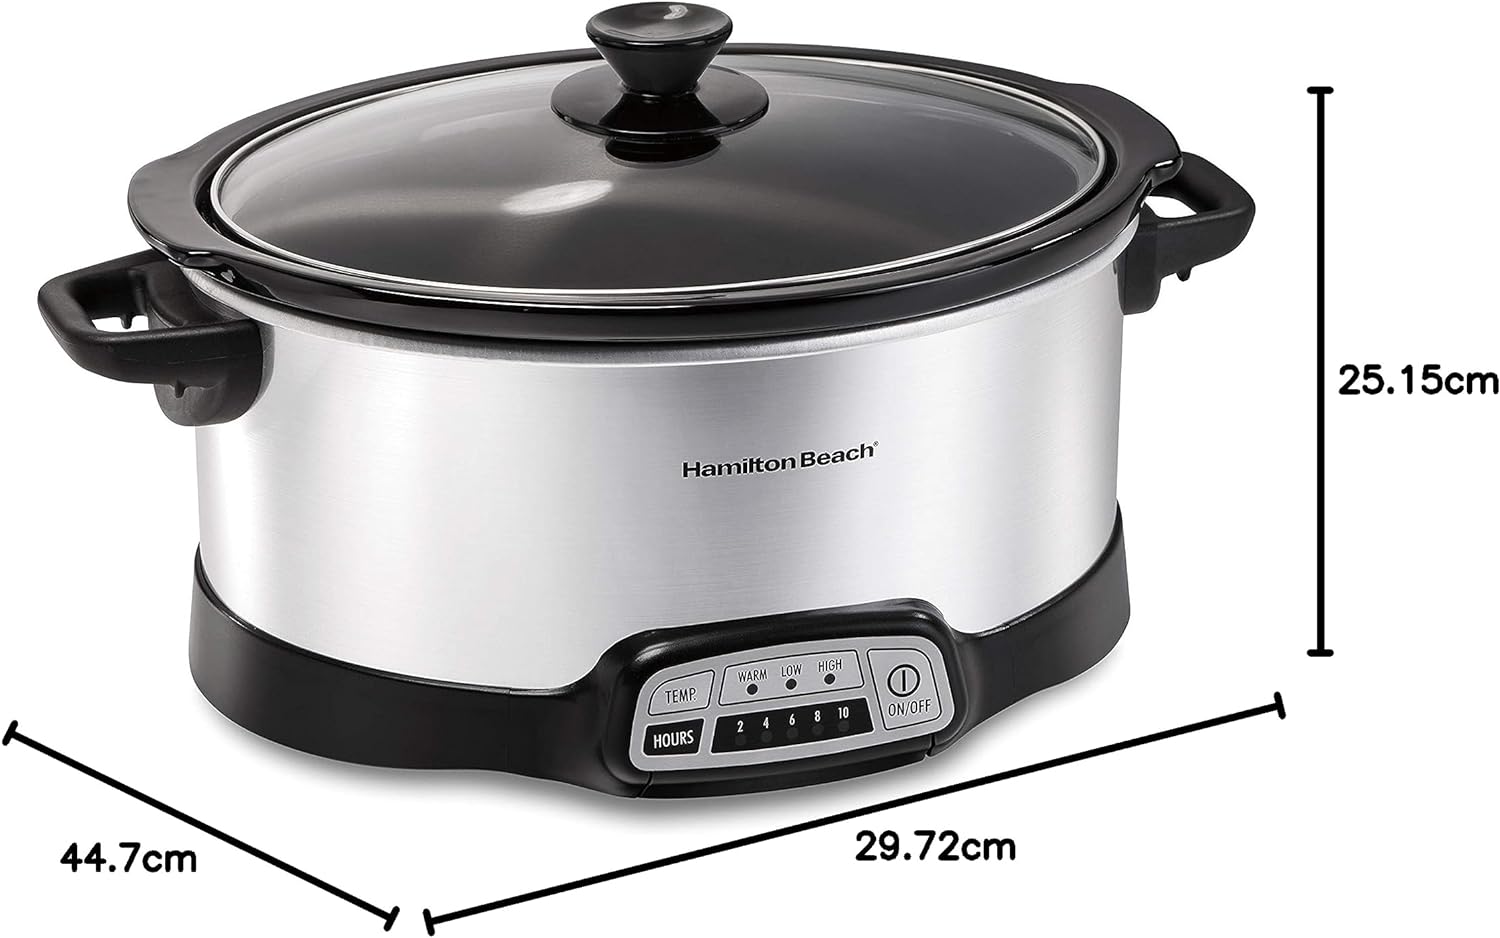 Hamilton Beach Programmable Slow Cooker with Flexible Easy Programming, 5 Cooking Times, Dishwasher-Safe Crock, Lid, 7 Quart, Silver